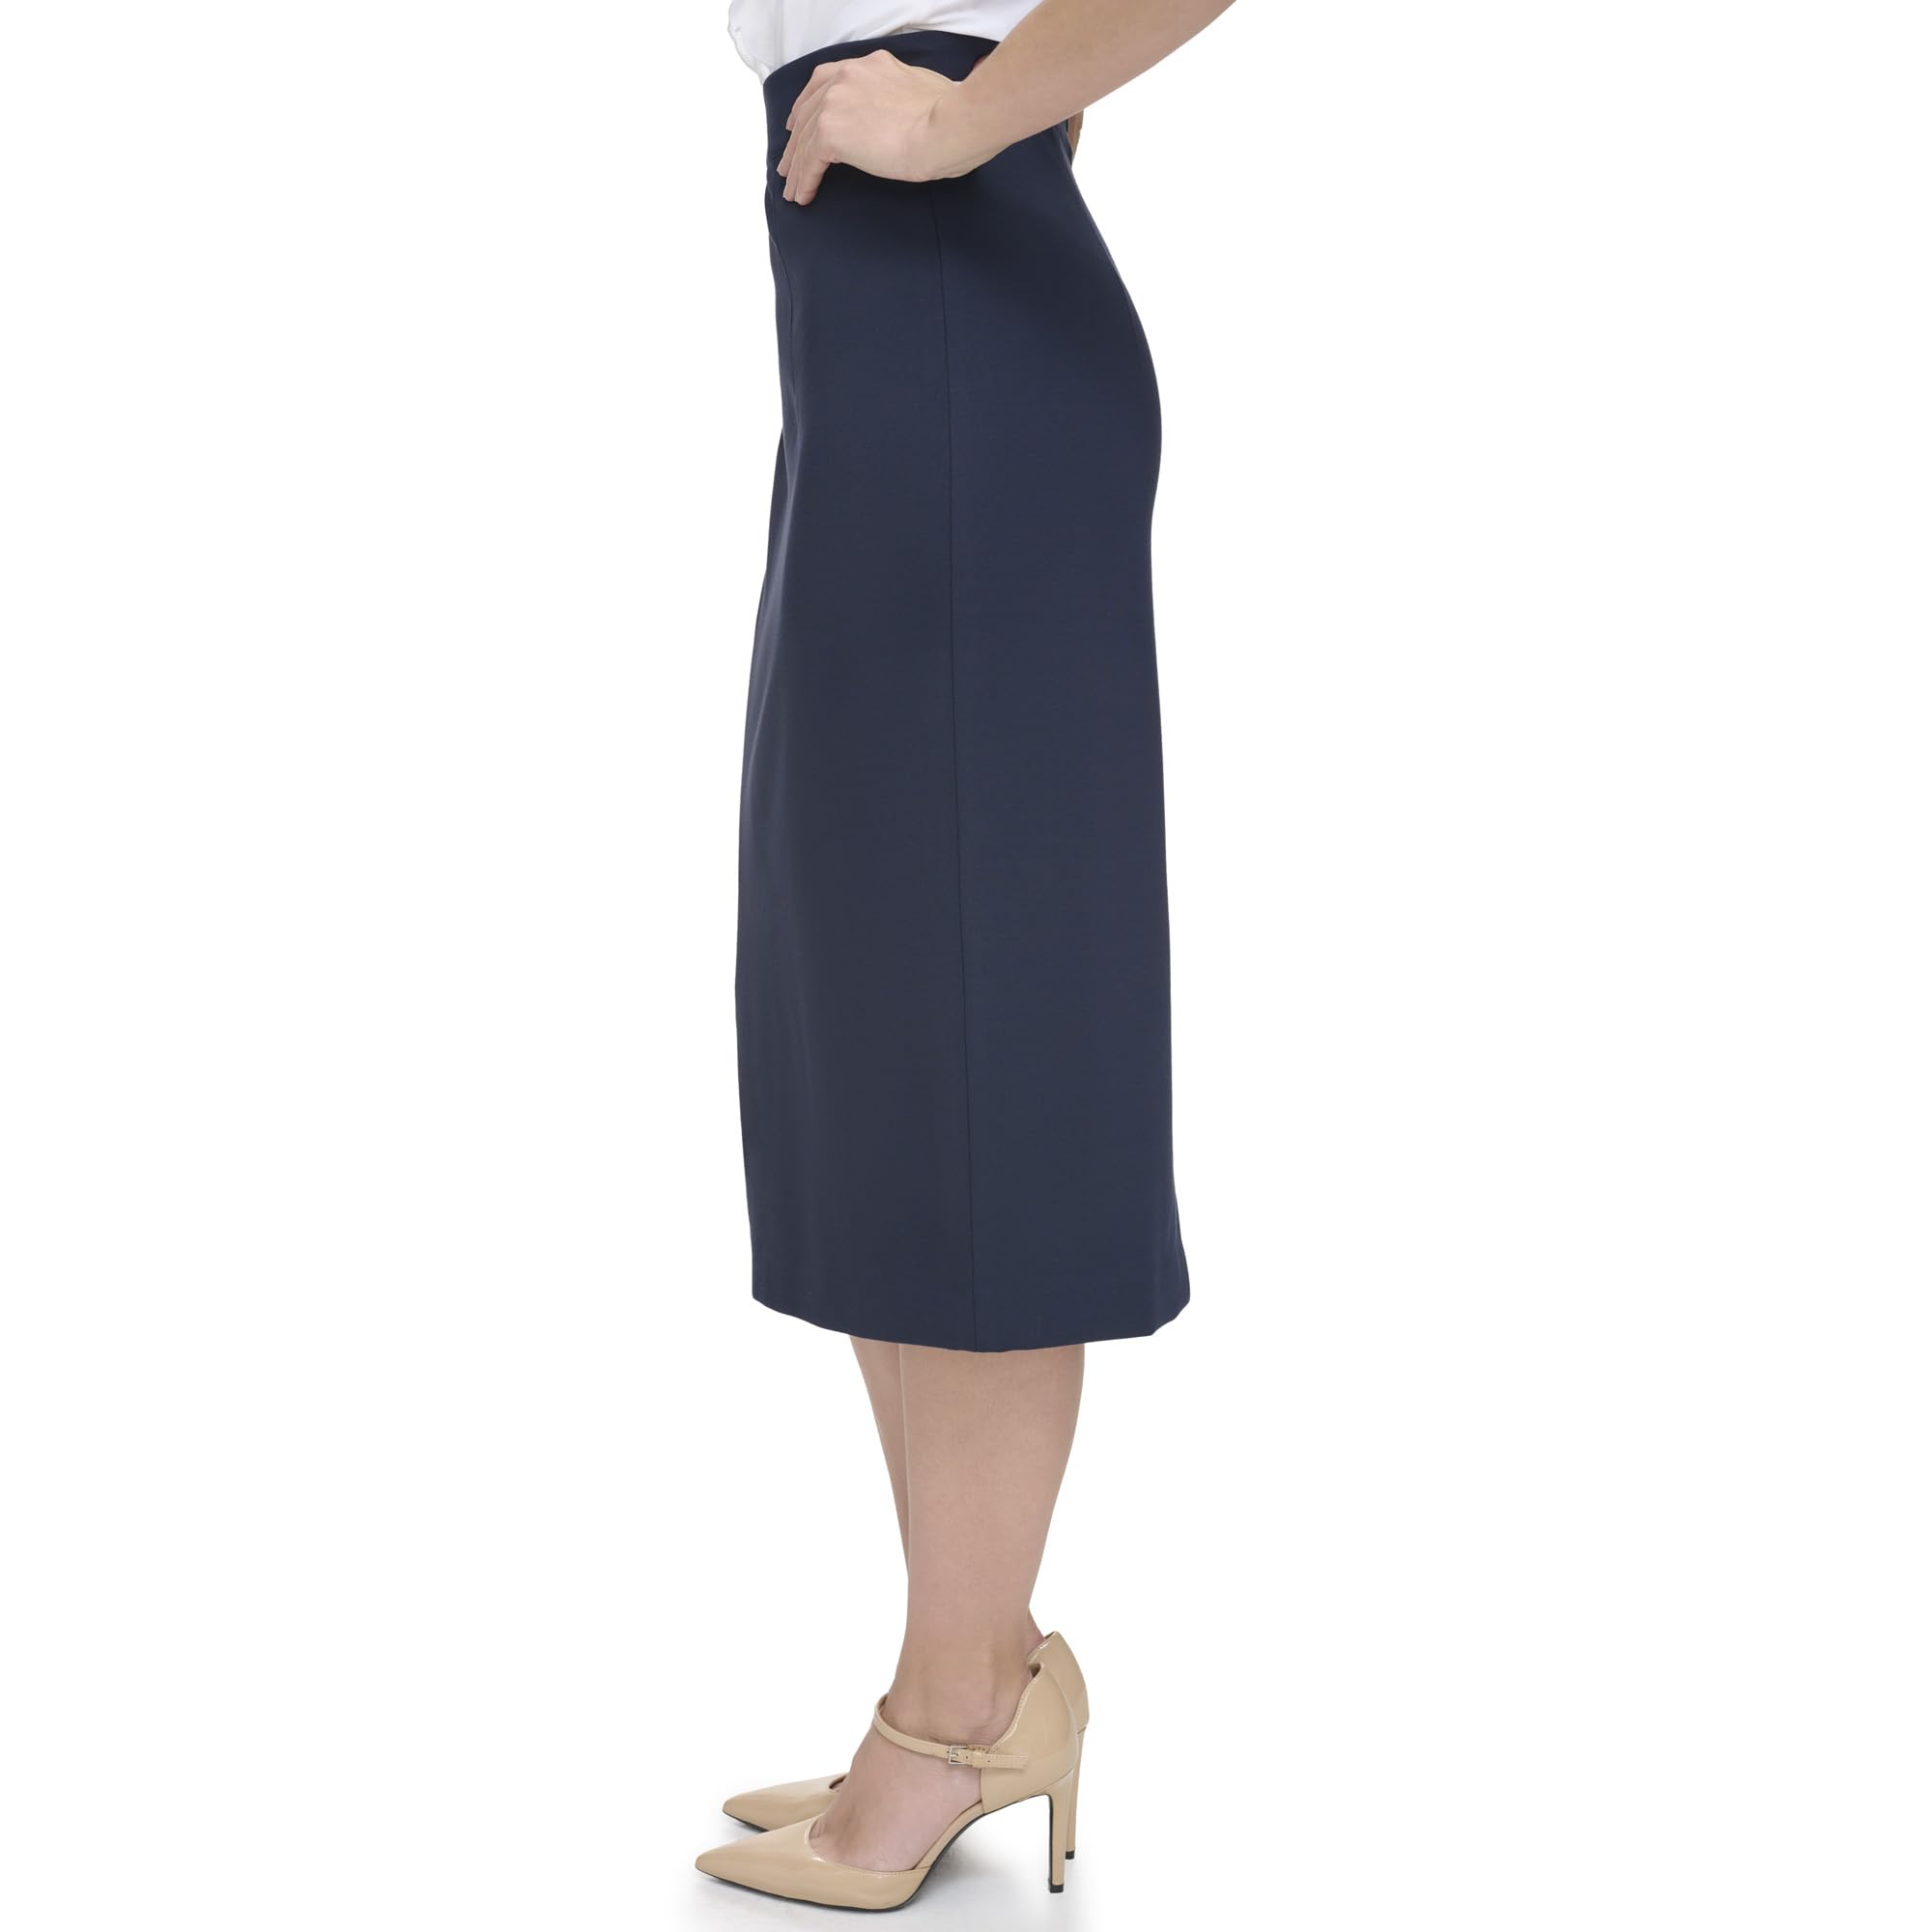 Tommy Hilfiger line Skirt – Classic and Flattering Business Casual Outfits for Women